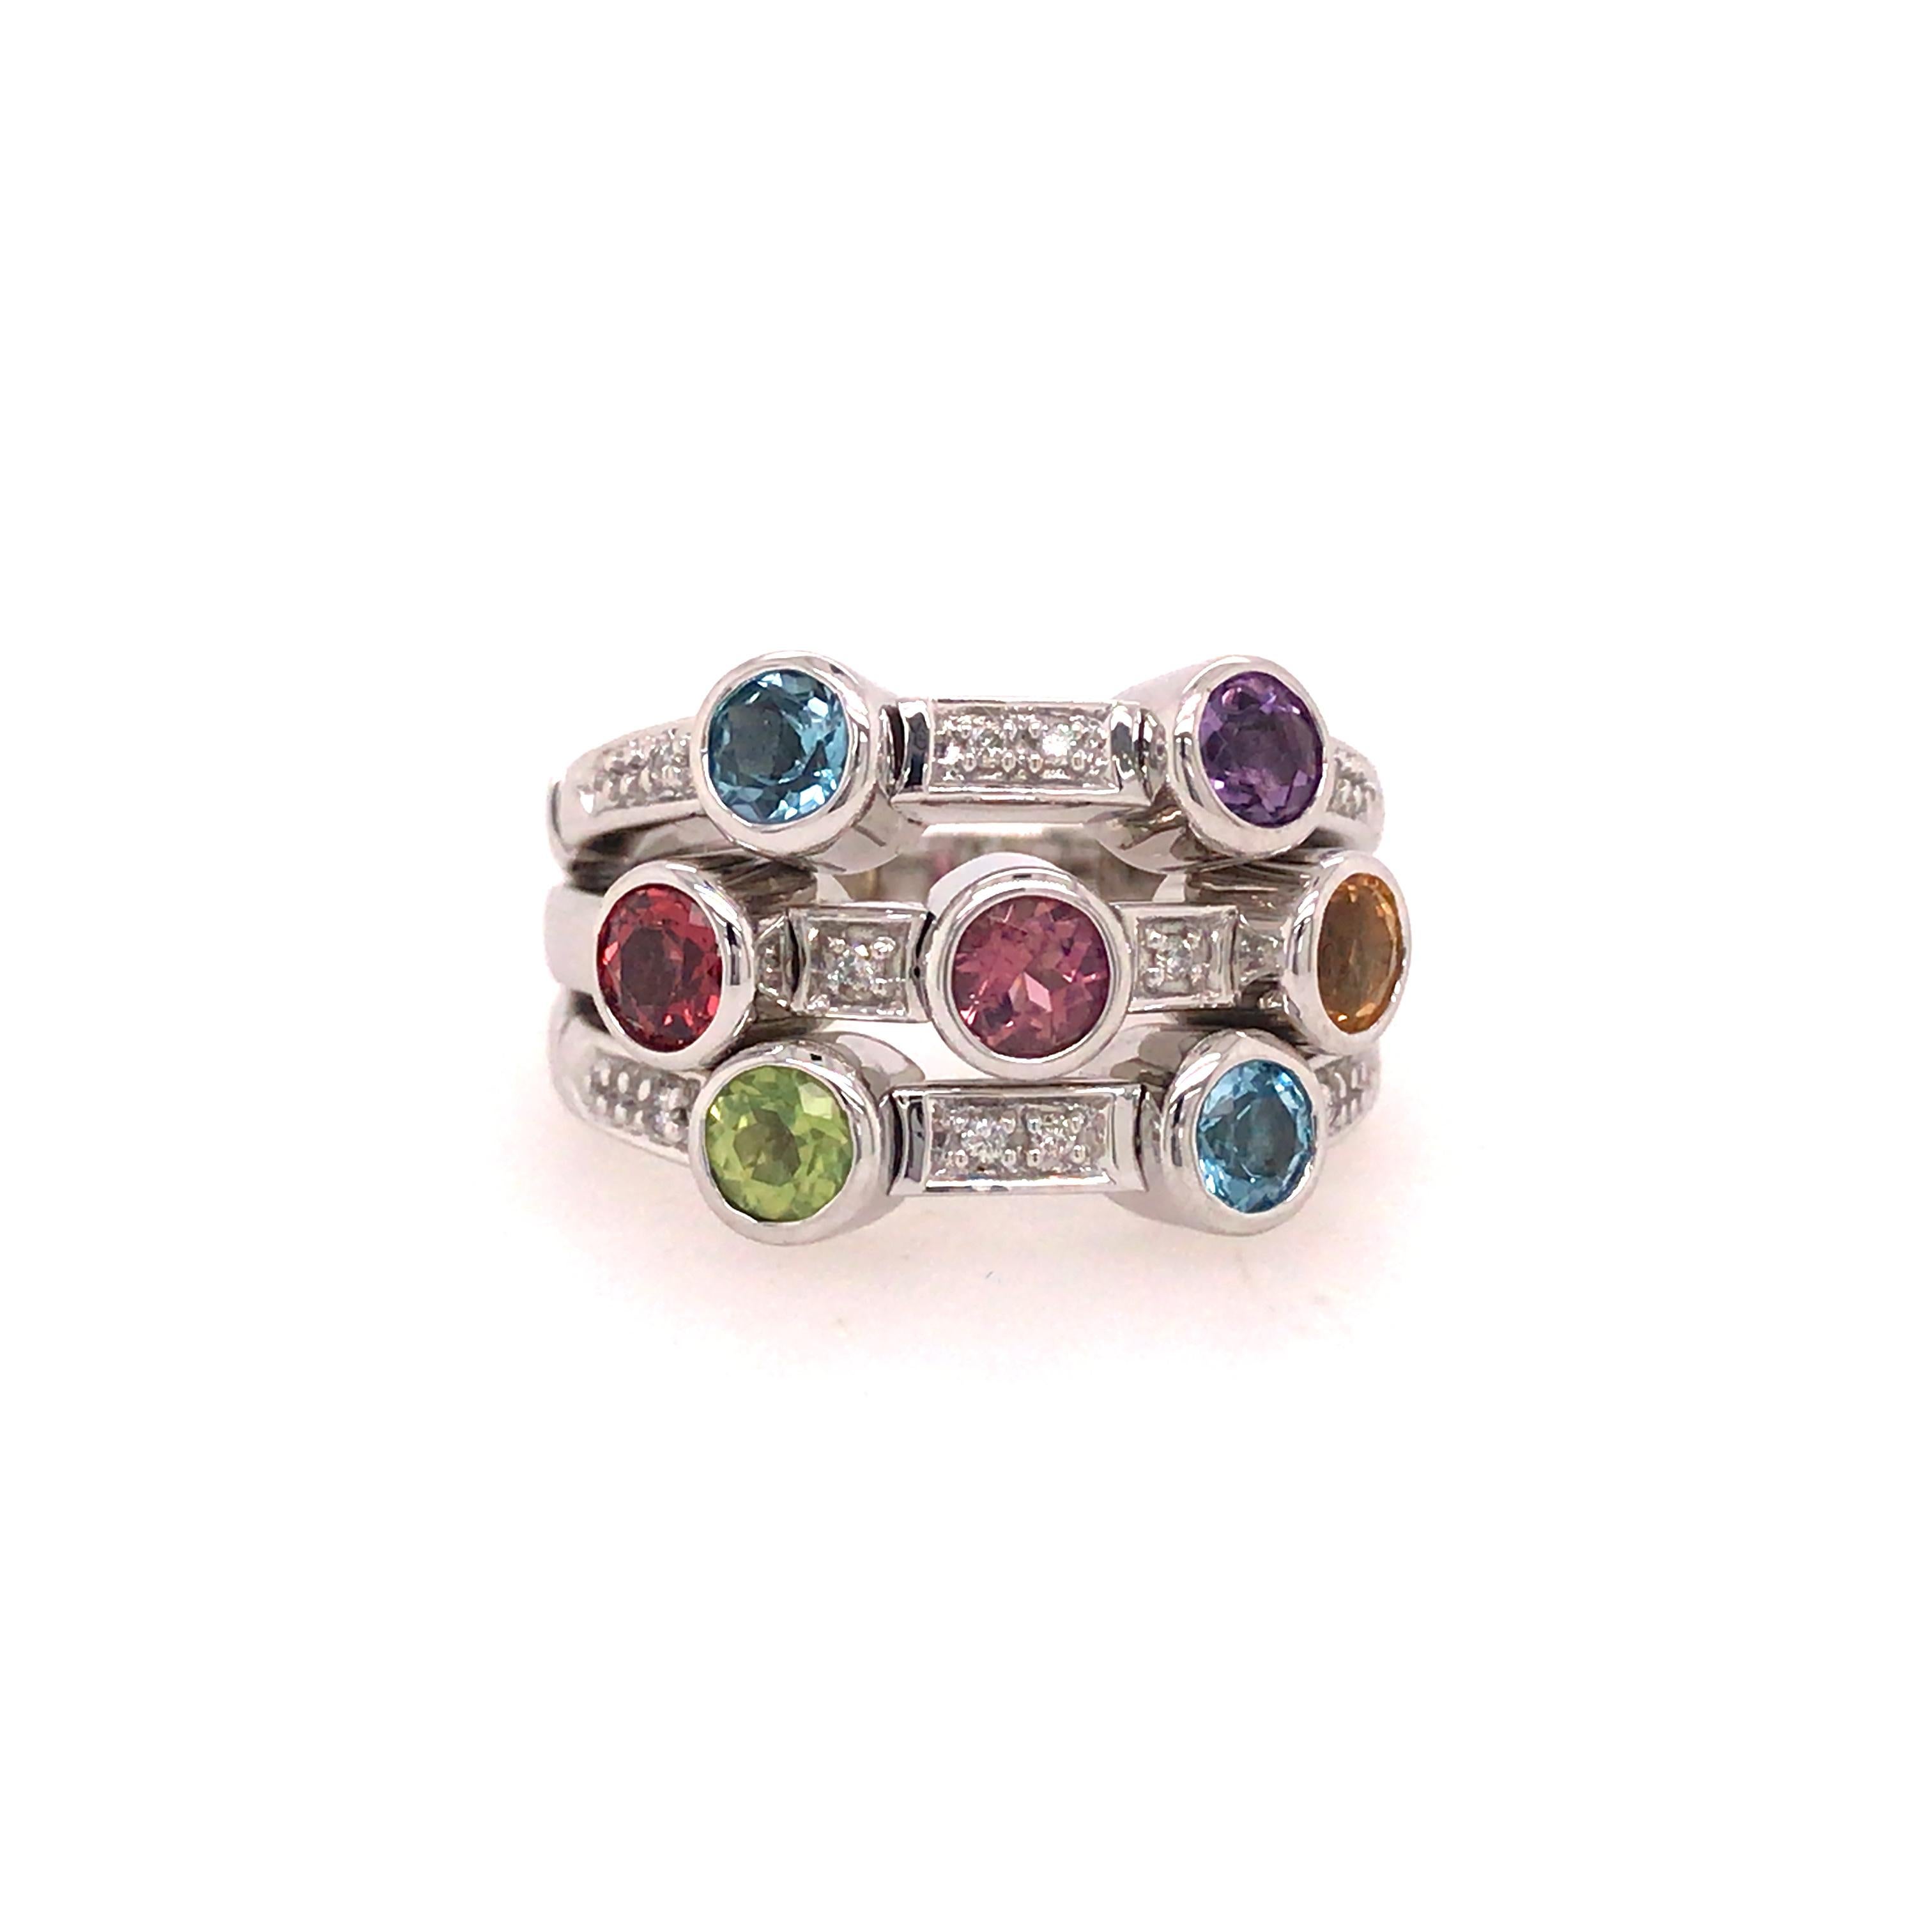 Sonia B Designs Gemstone and Diamond 3-Row Ring in 14K White Gold.  (10) Round Brilliant Cut Diamonds weighing 0.05 carat total weight, G-H in color and VS in clarity are expertly set. Peridot, Amethyst, Topaz and Citrine Gemstones weighing